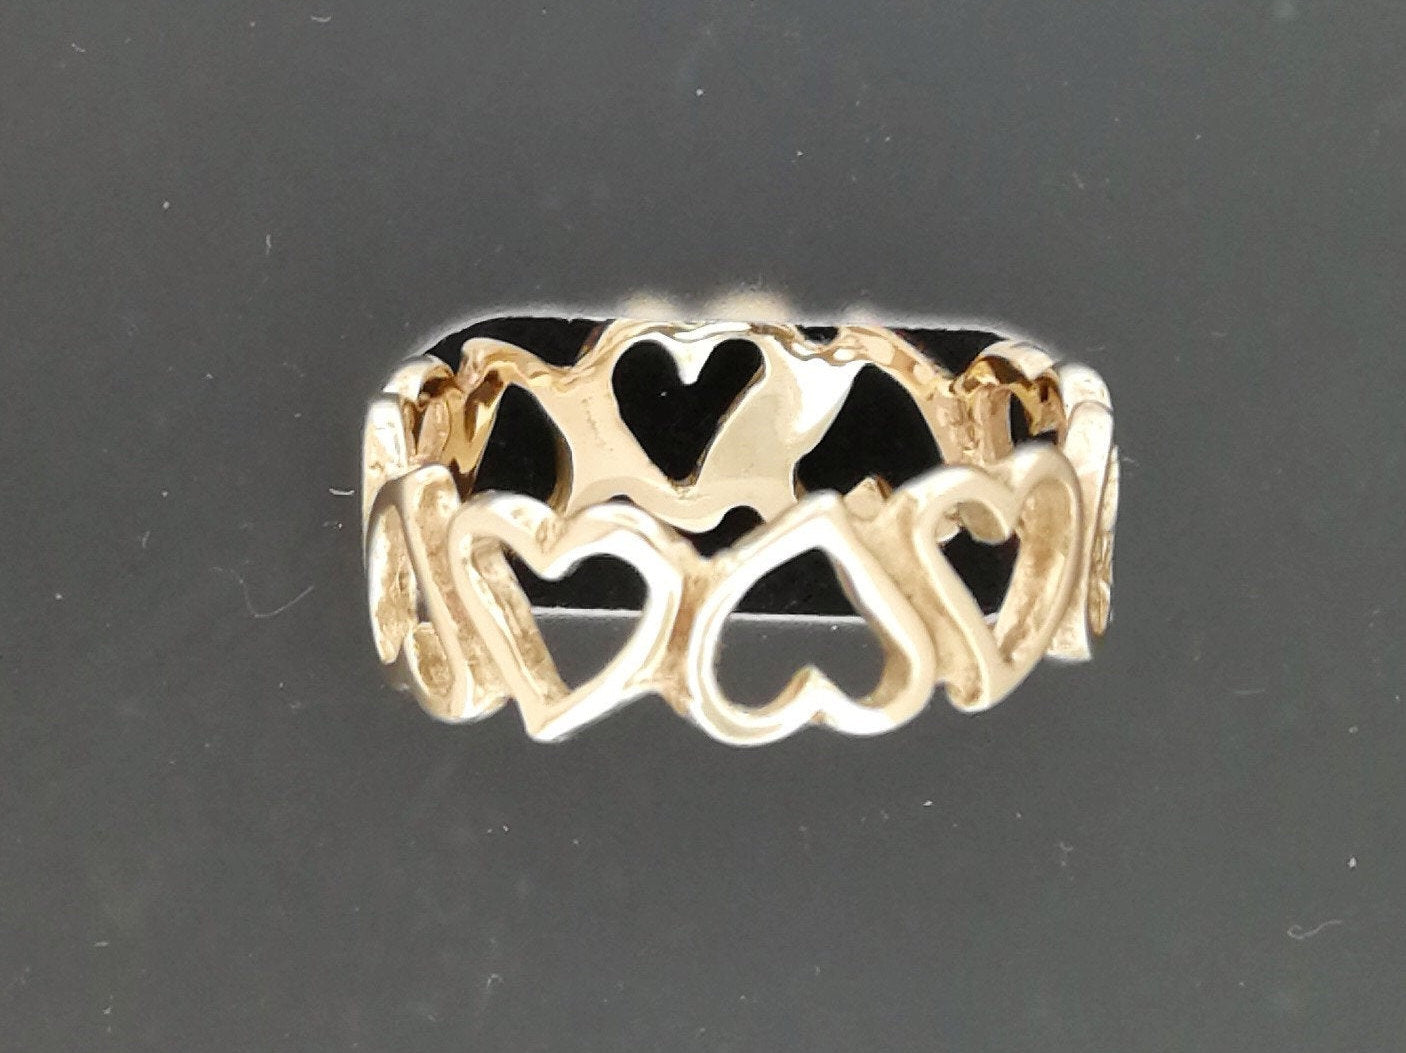 Linked Hearts Band in Sterling Silver or Antique Bronze, Sterling Silver Band, Silver Heart Ring, Bronze Heart Ring, Antique Bronze Band, Silver Love Ring, Bronze Love Ring, Endless Heart Ring, Silver Everyday Ring, Bronze Everyday Ring, Silver Hearts Ring, Bronze Hearts Ring, Romantic Ring Gift, Friendship Ring Gift, Ring Gift For Daughter, Ring Gift For Her